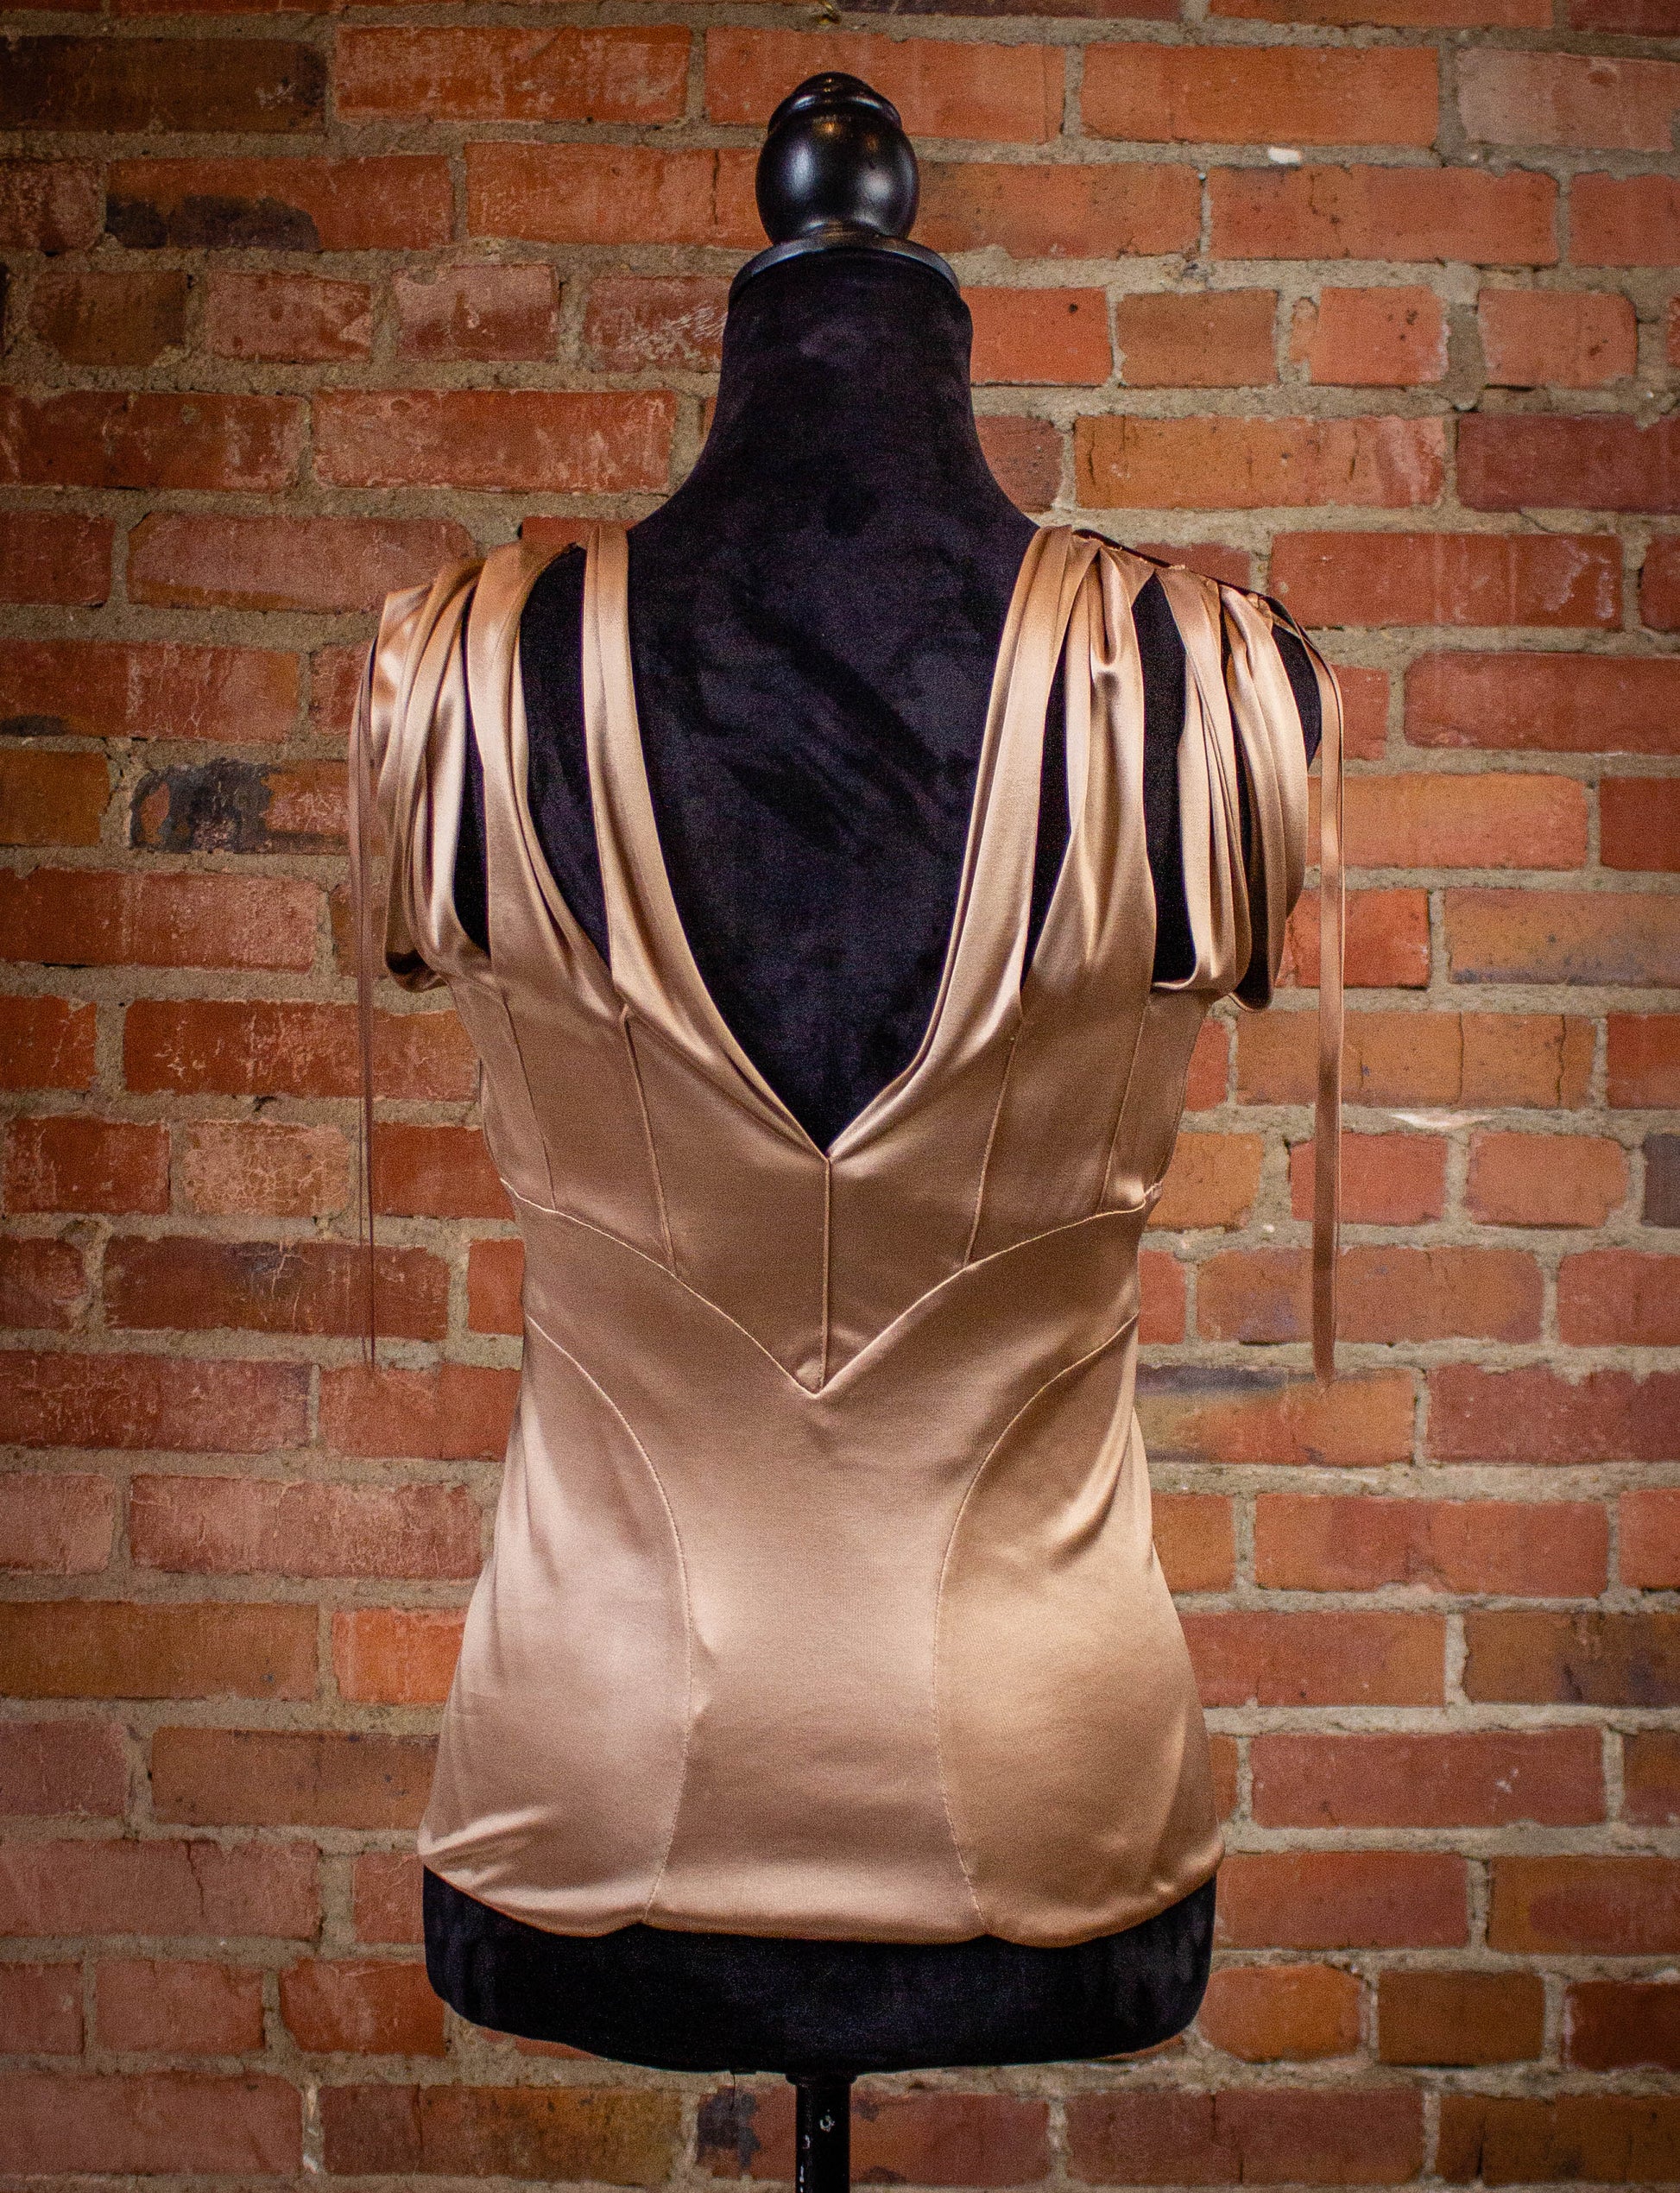 Yves Saint Laurent Copper Blouse with Ribbon Ties Small/Medium